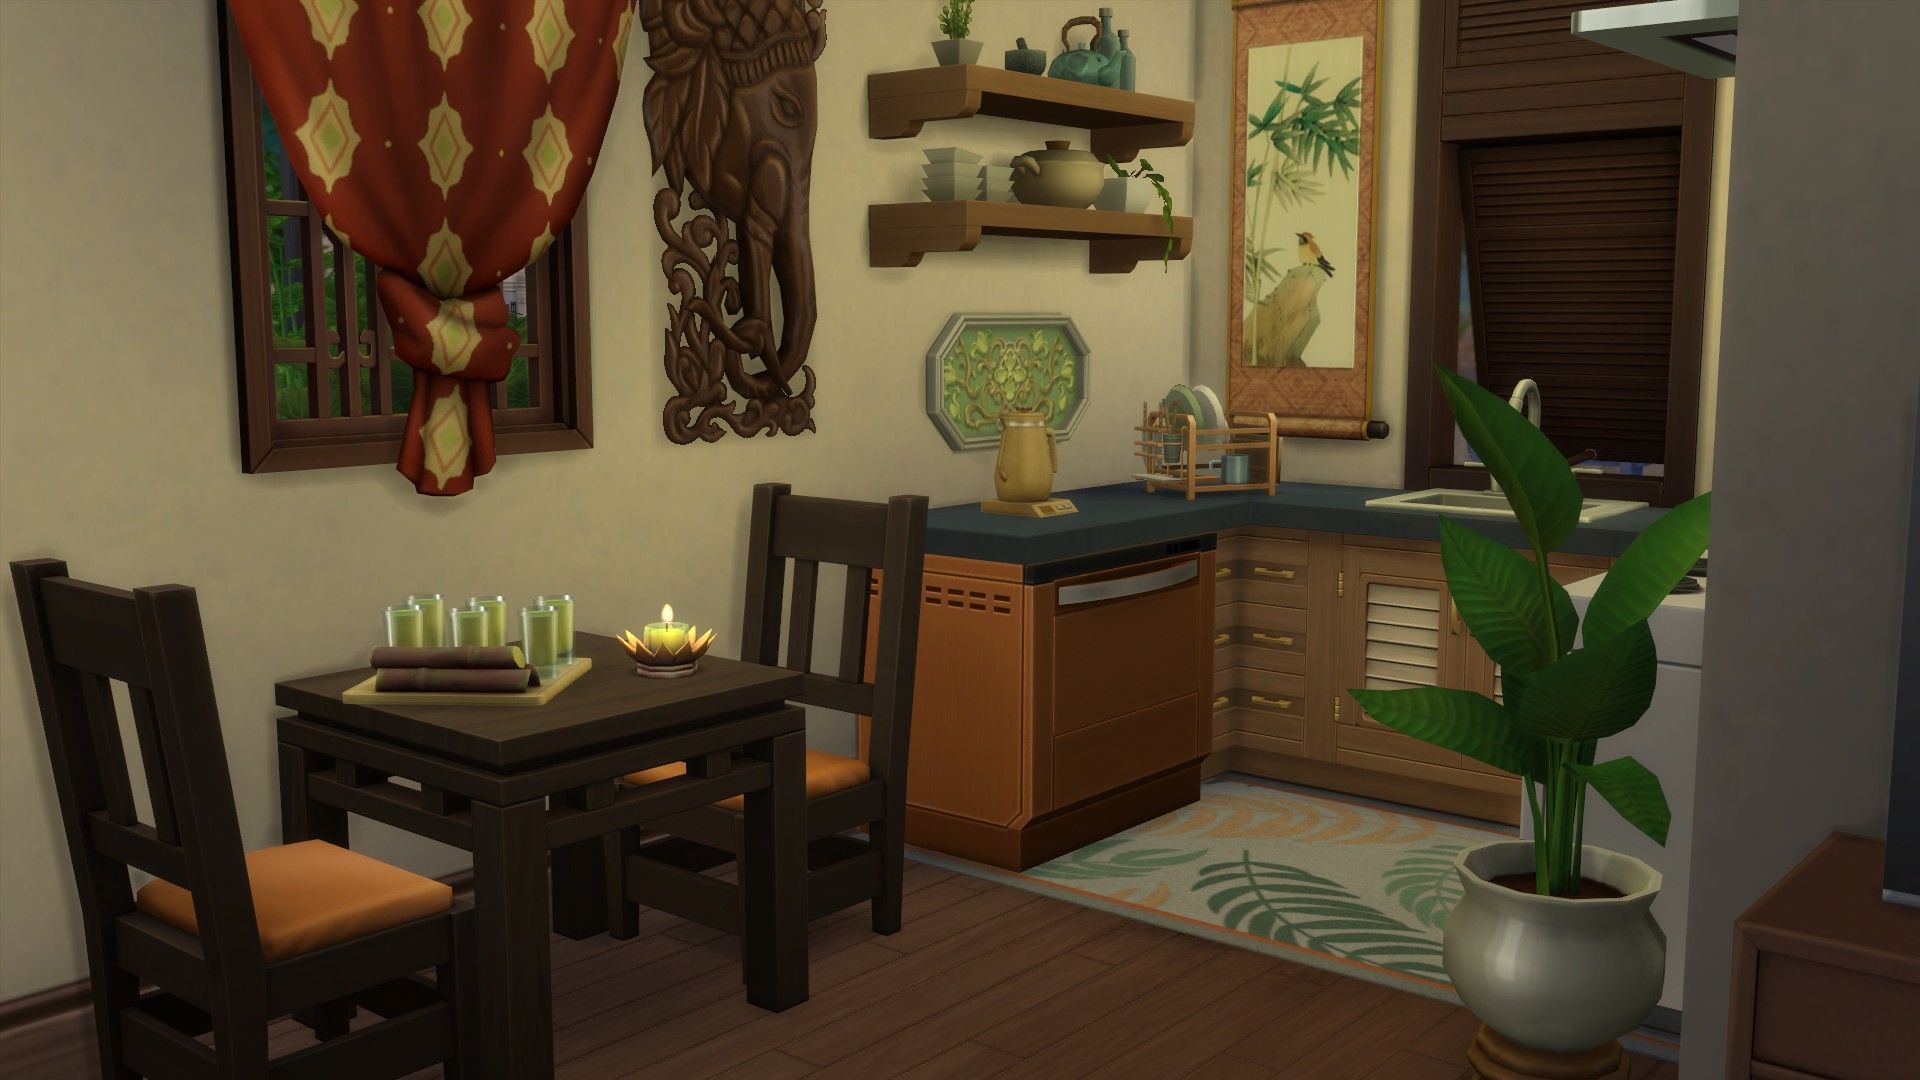 The Sims 4 kitchen showing a table with sugar can drinks and a candle, a kettle, dishes, shelves, and wall art.